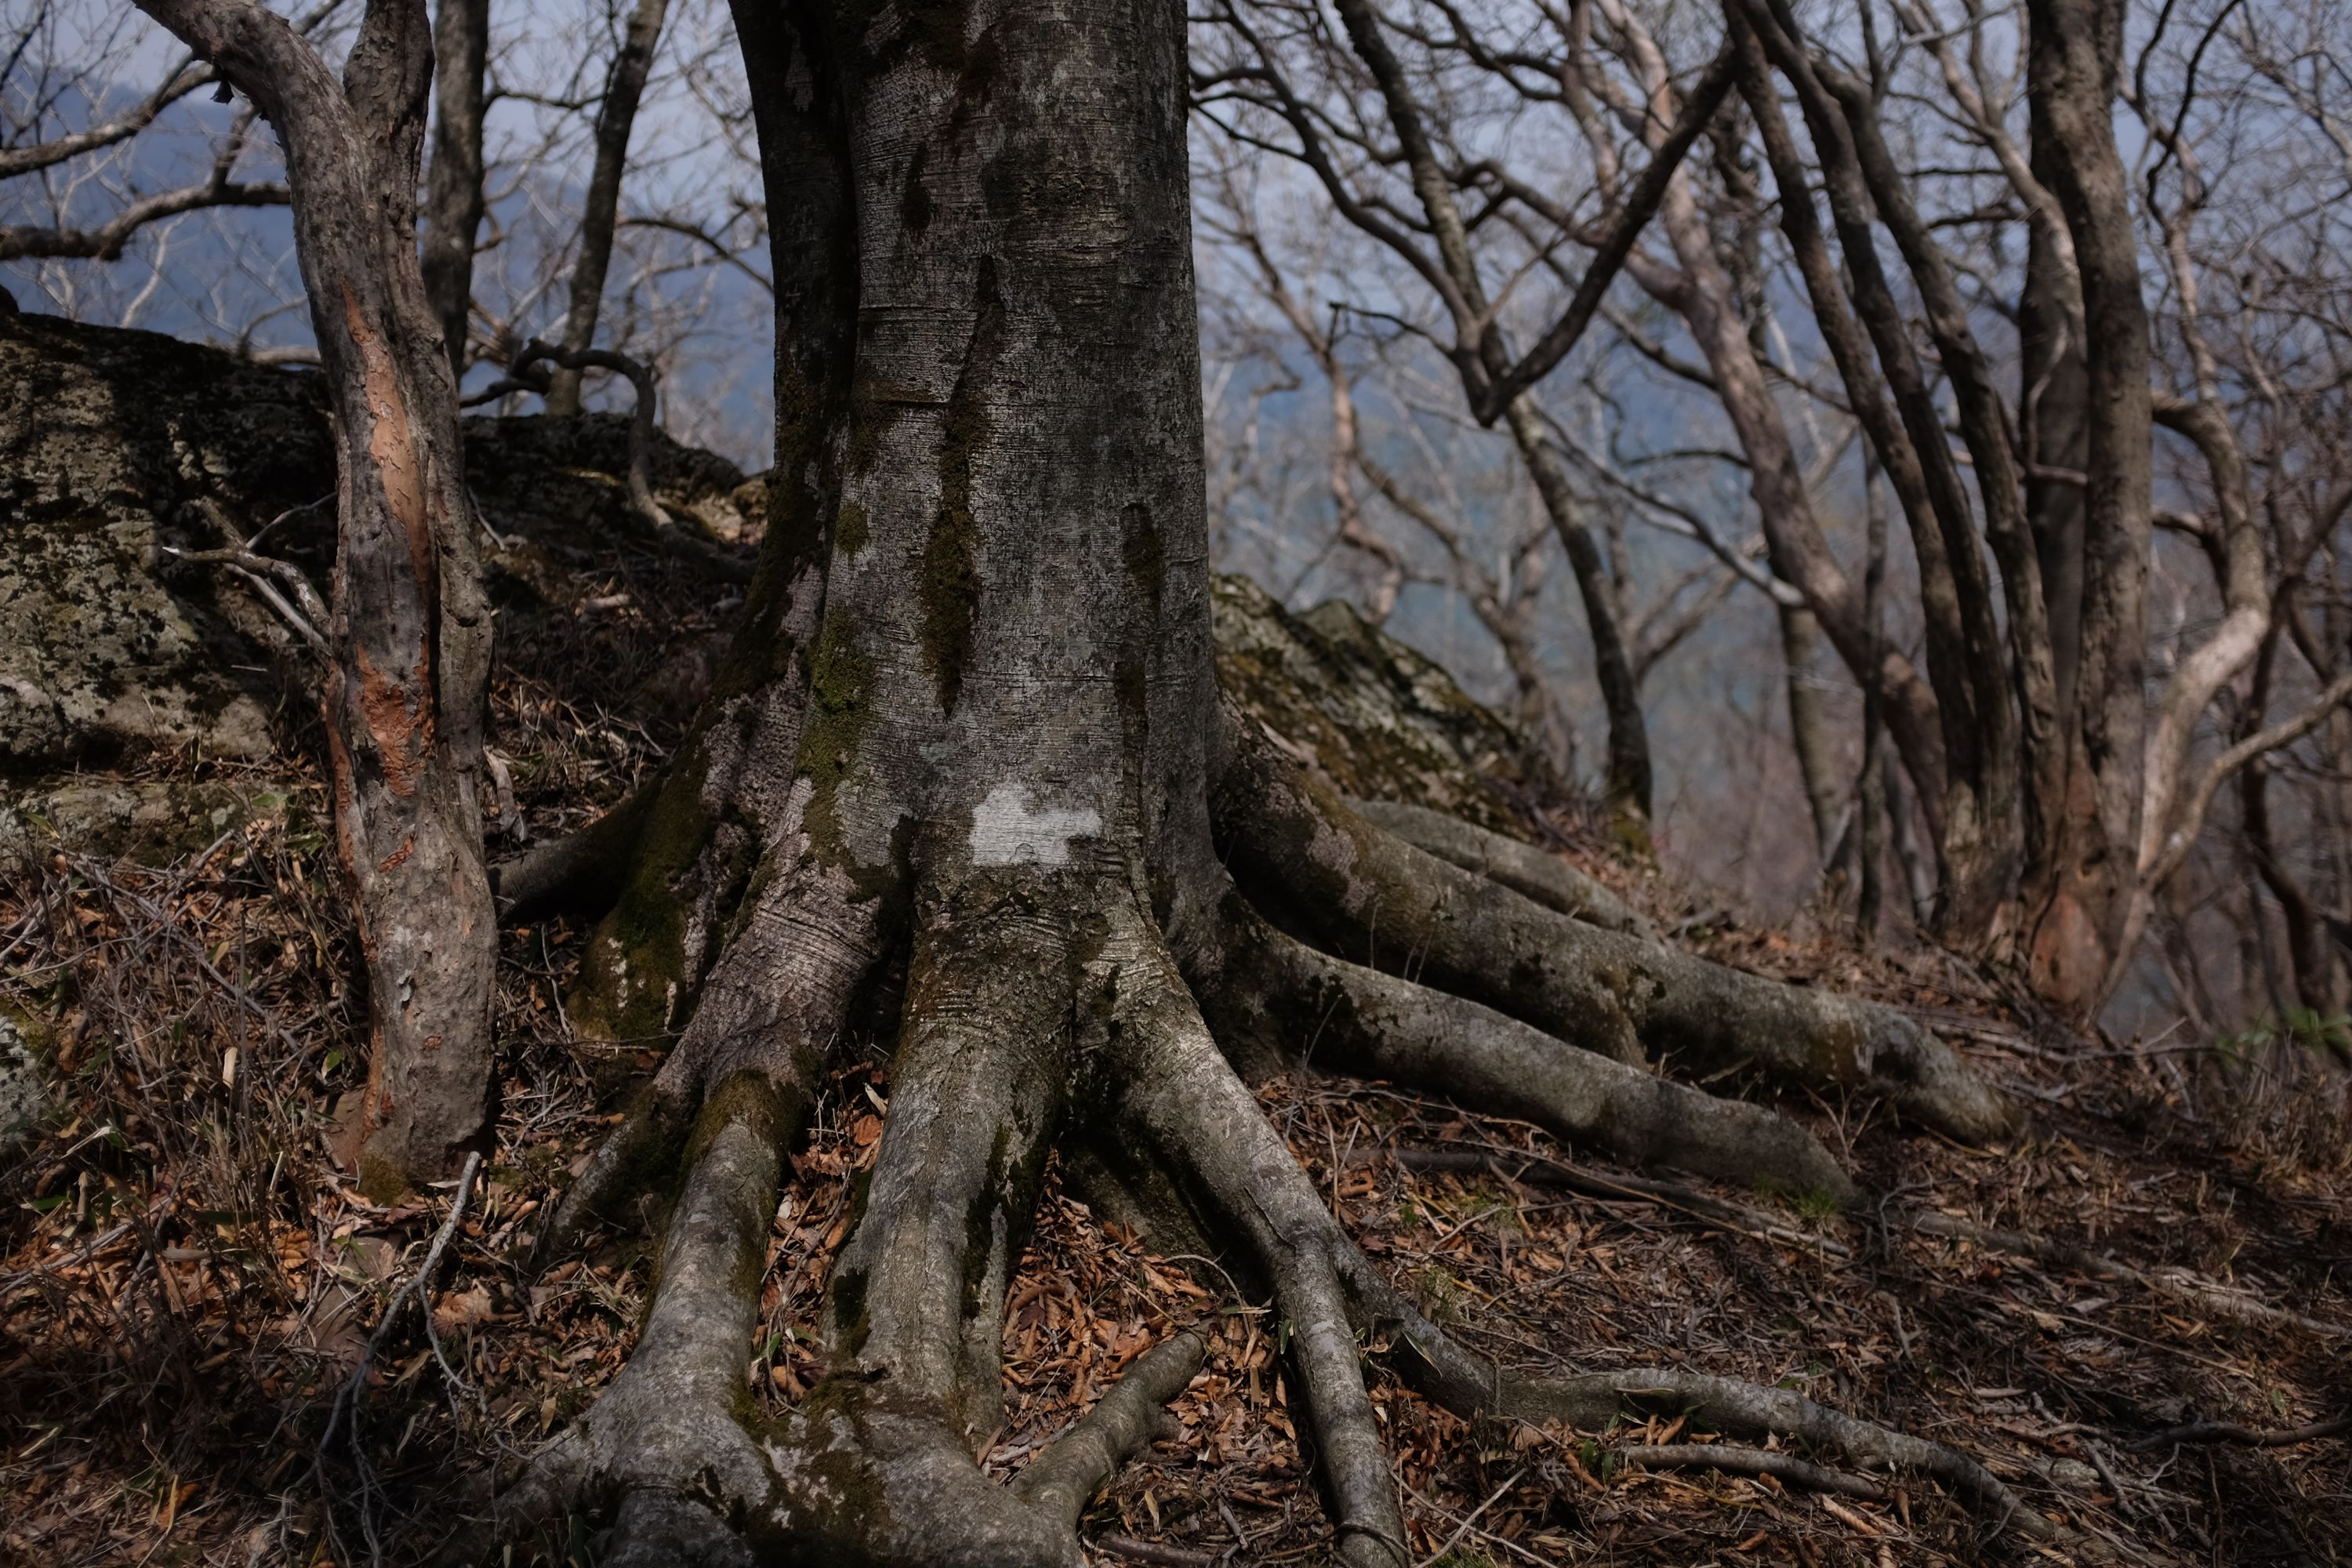 The roots of a large tree cling to the thin mountain soil.